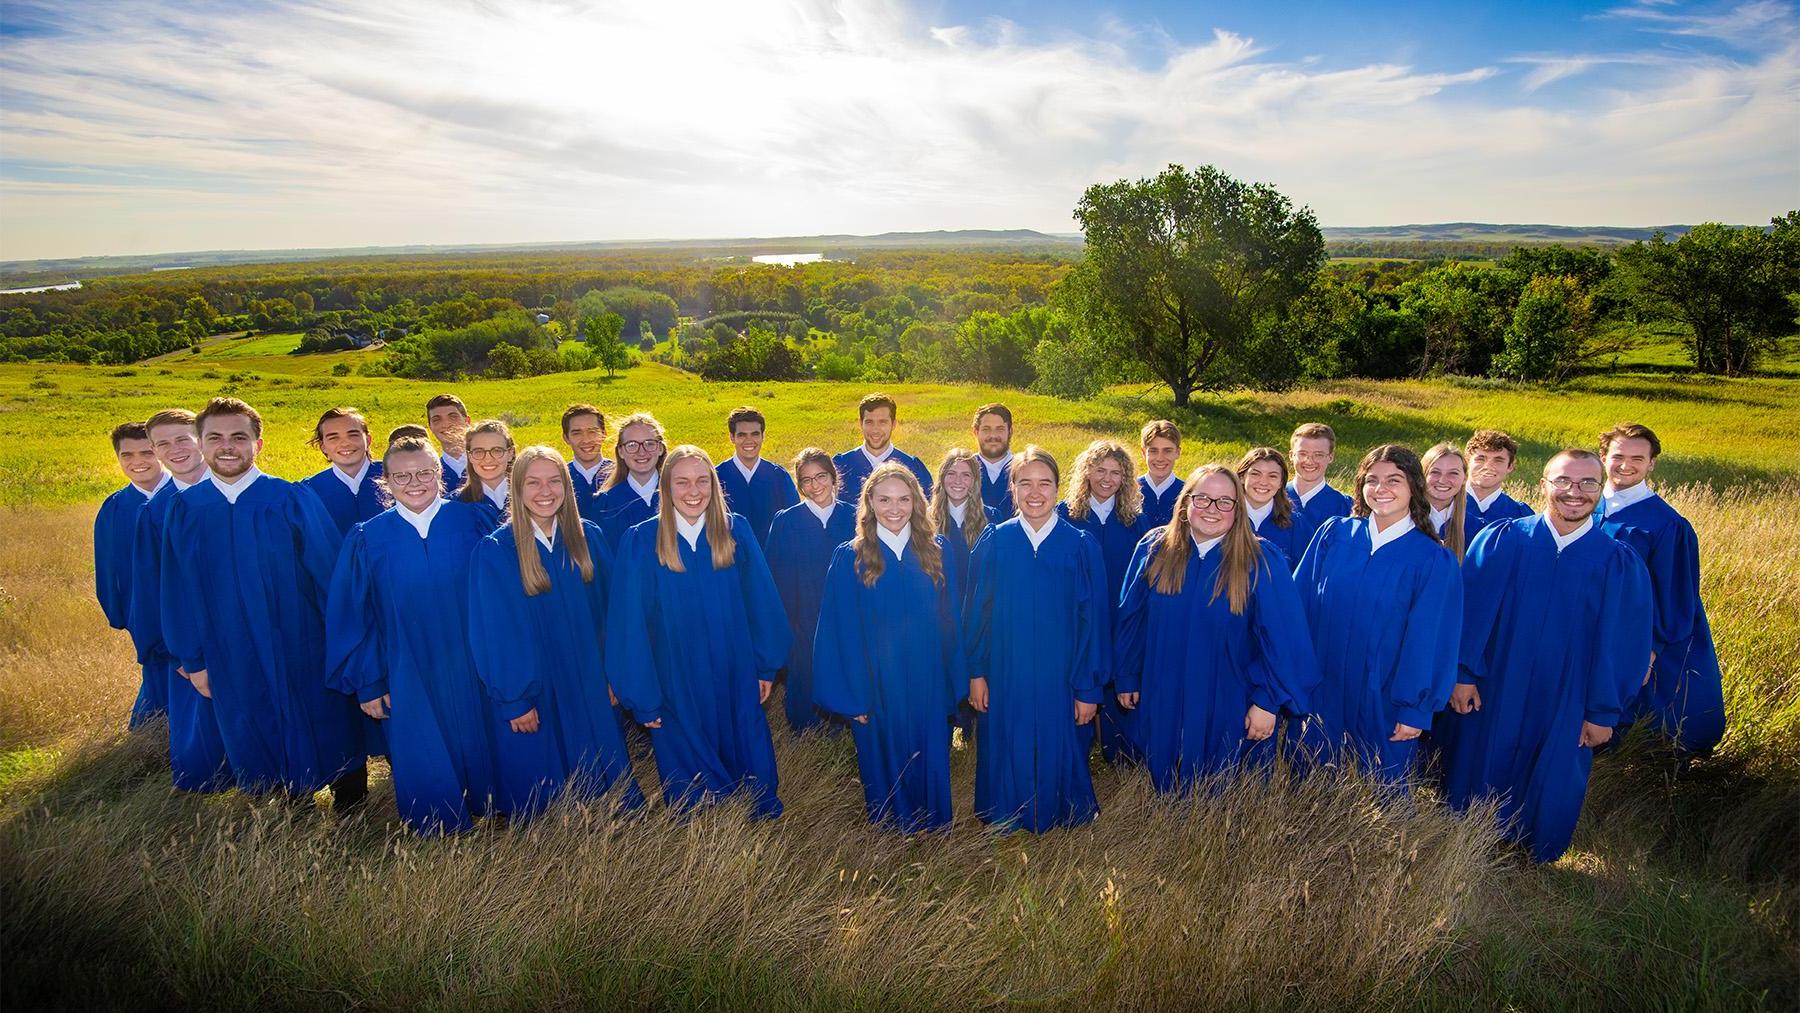 Capella students outdoors in a field